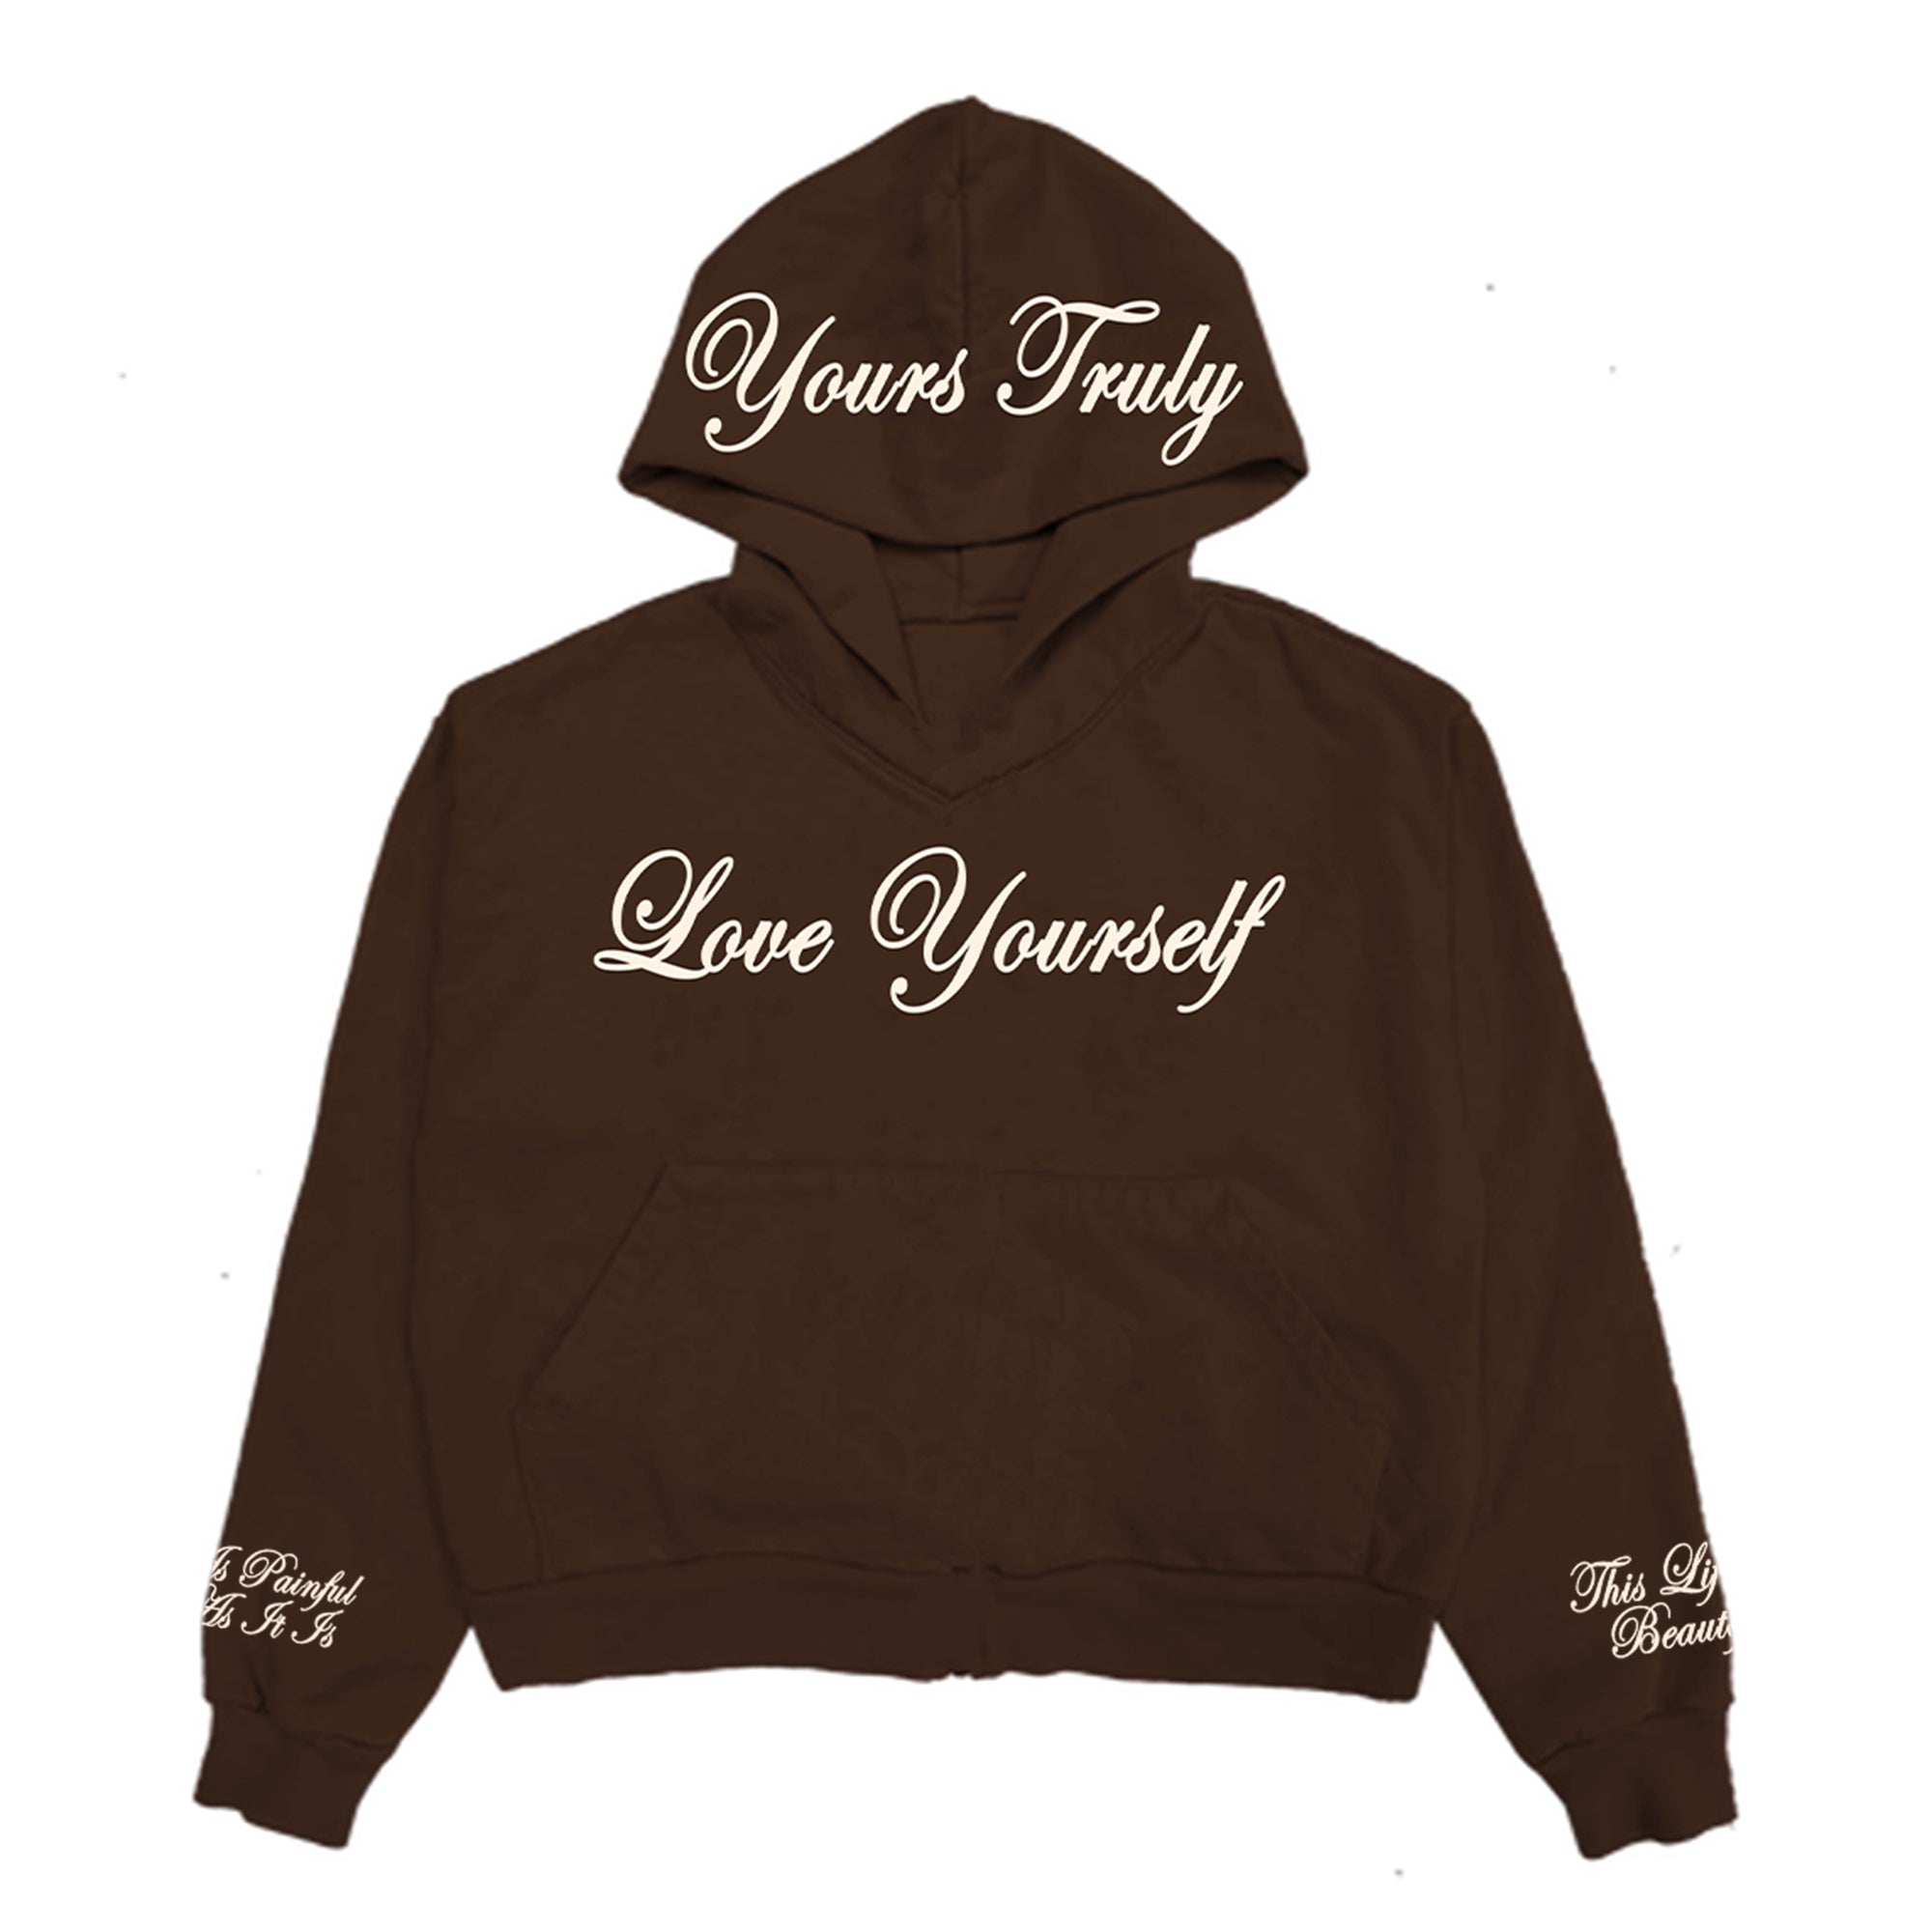 LOVE YOURSELF EMBROIDERED HOODIE - BROWN